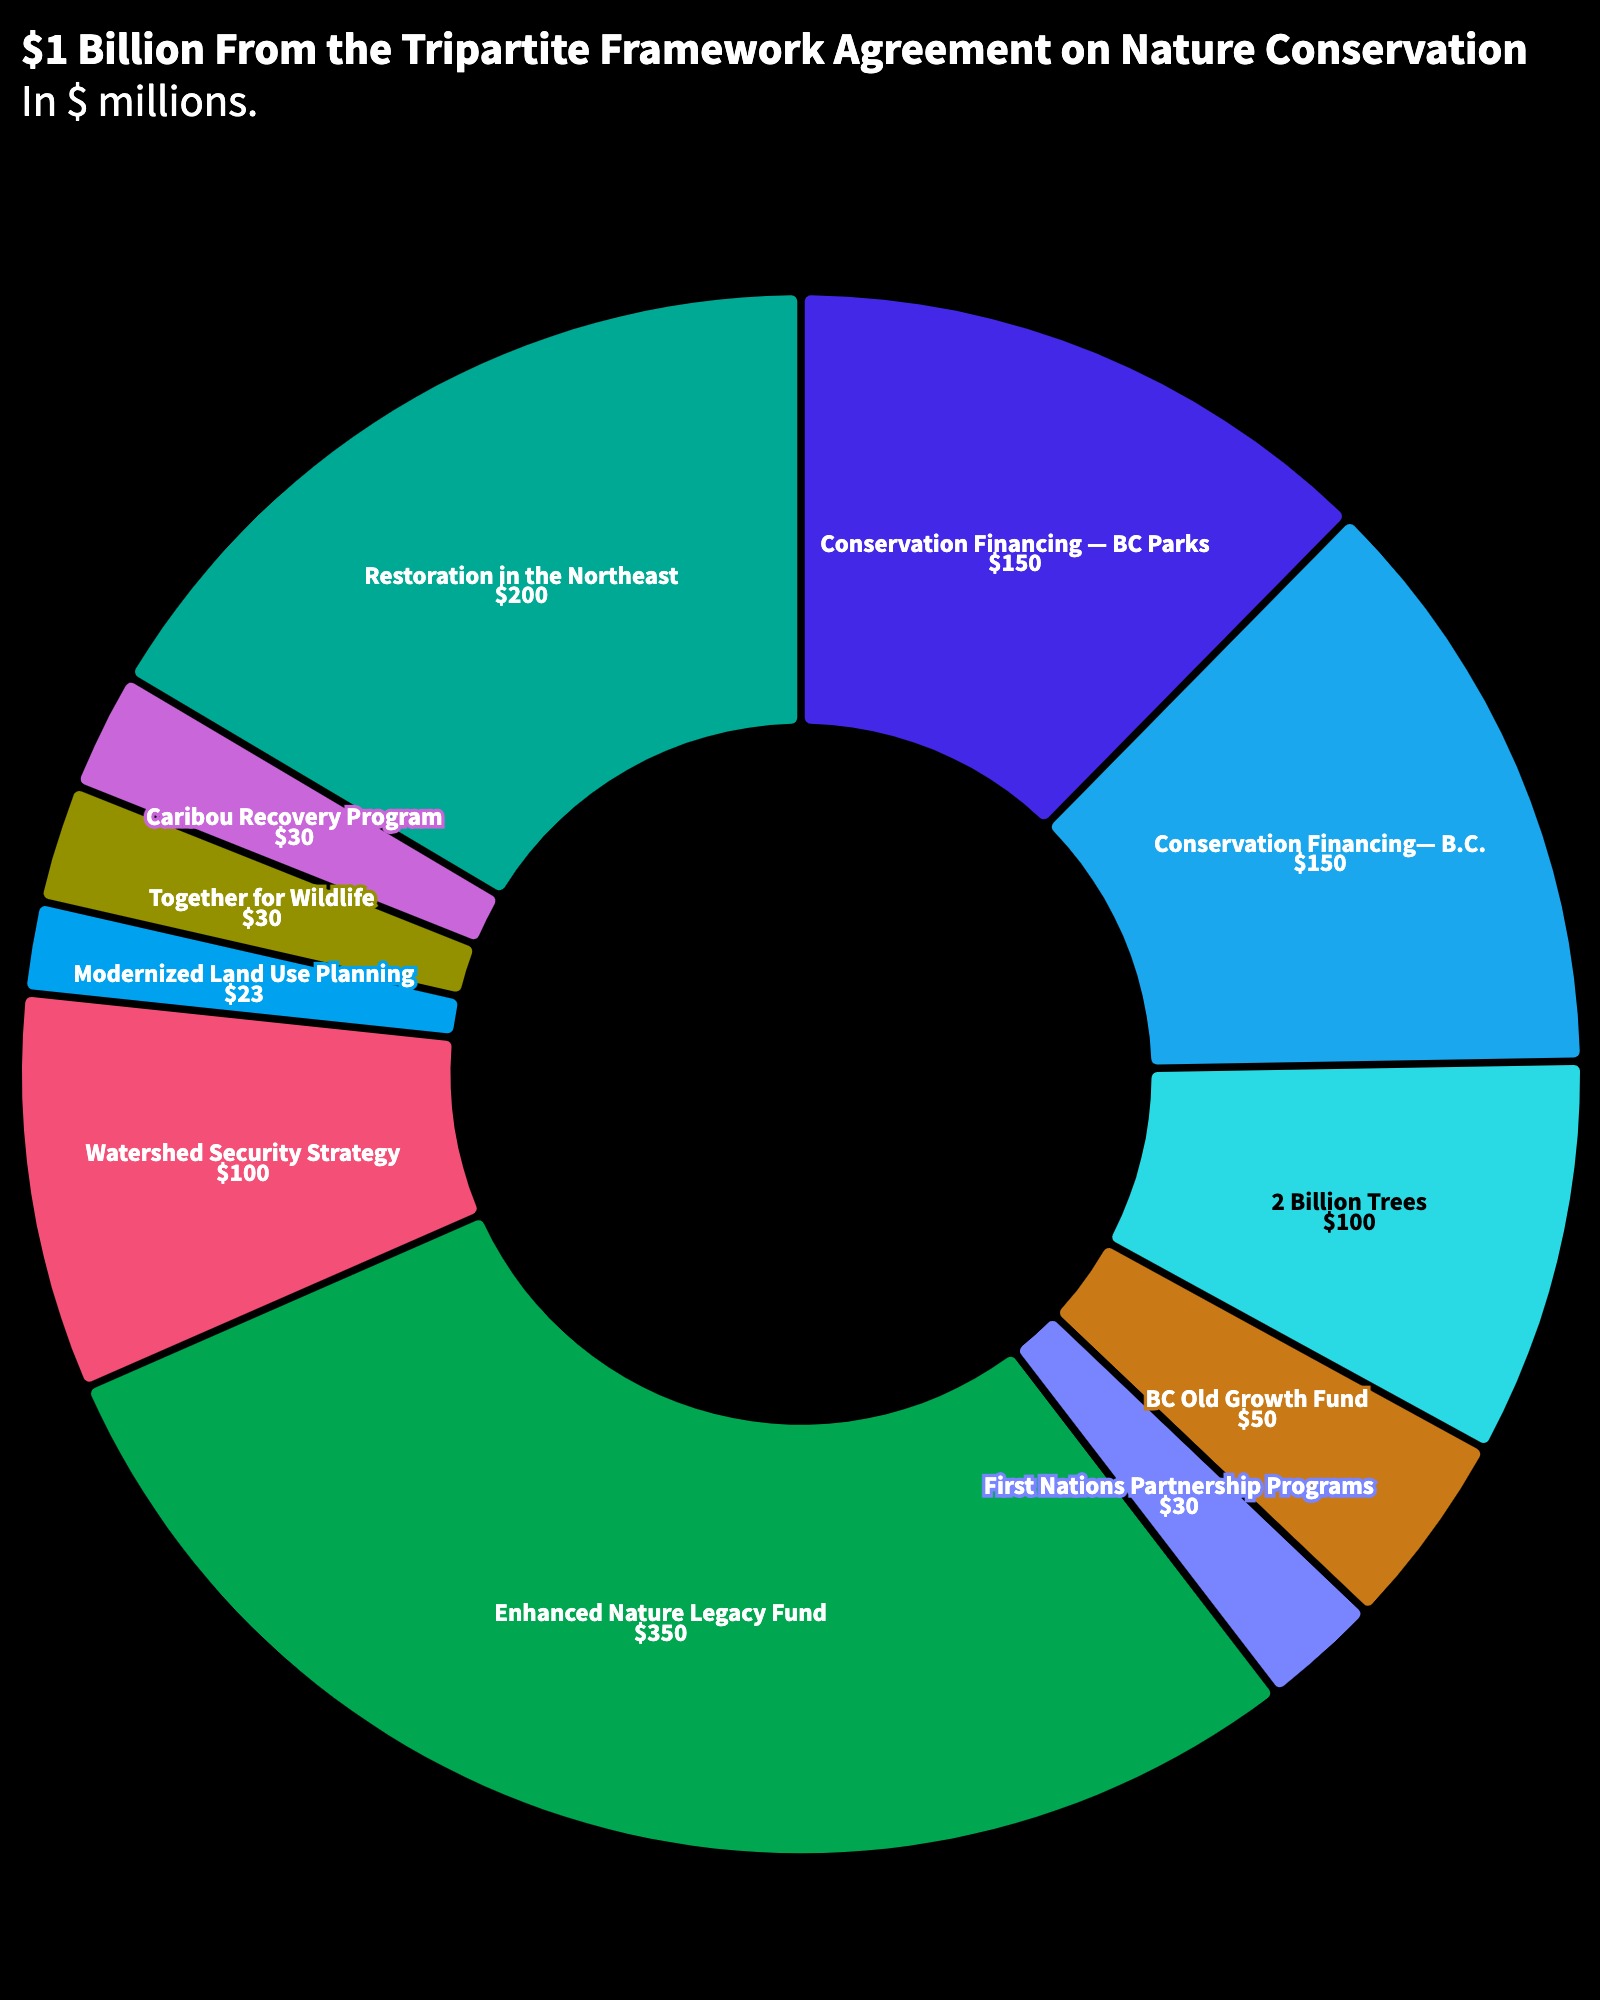 A doughnut-shaped chart shows how the $1 billion in funding will be disbursed. Major sections include restoration in the northeast, conservation financing via BC Parks and BC, and the Enhanced Nature Legacy fund.